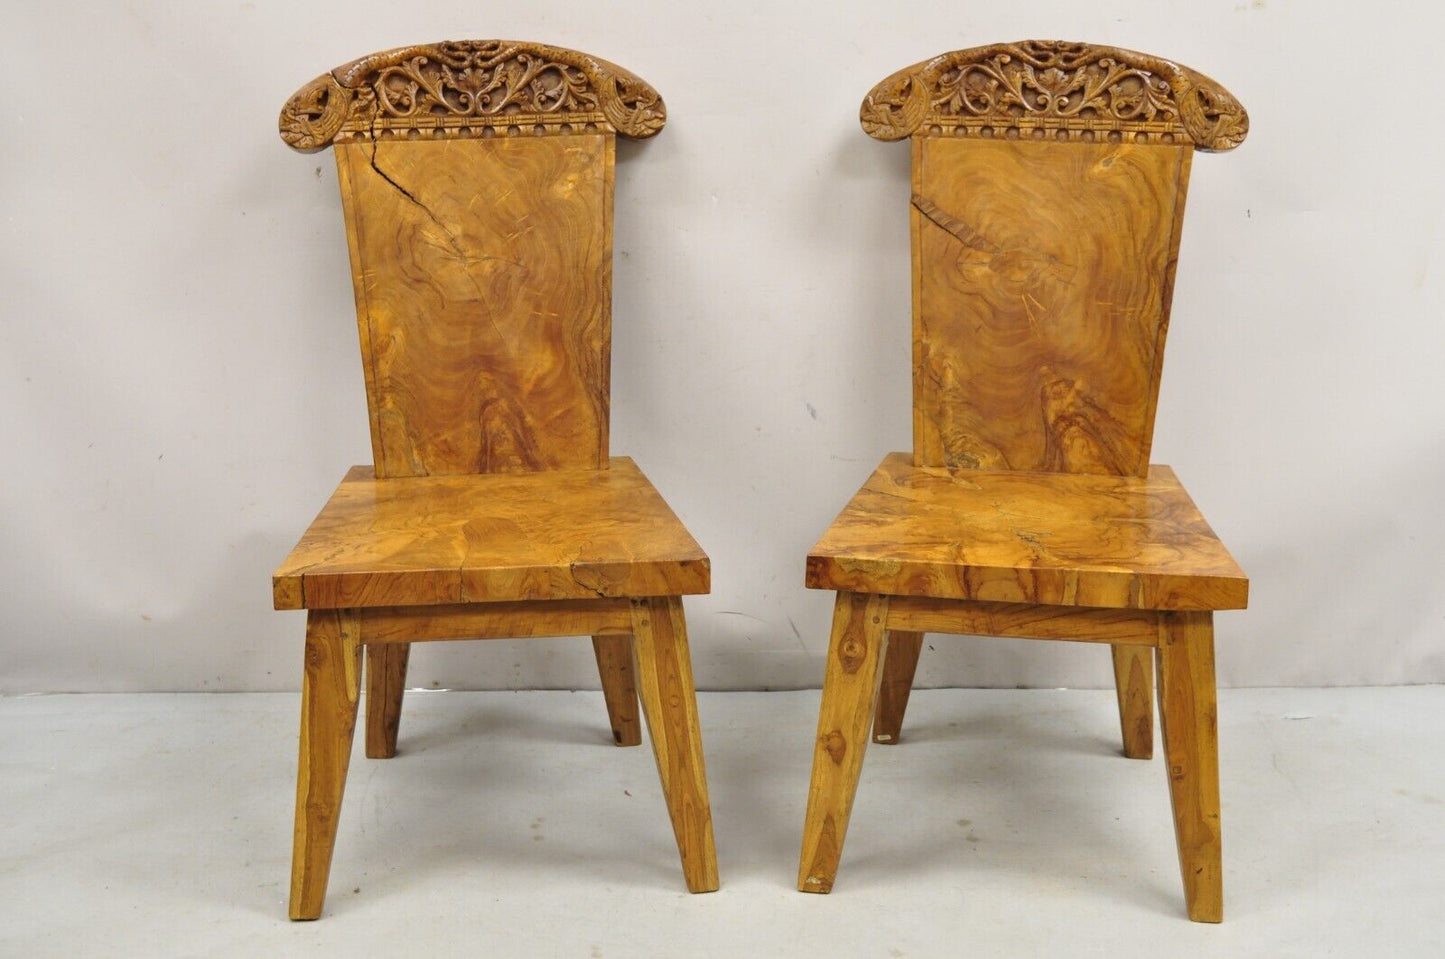 Indonesian Carved Solid Burl Wood Slab Continental Figural Side Chairs - a Pair